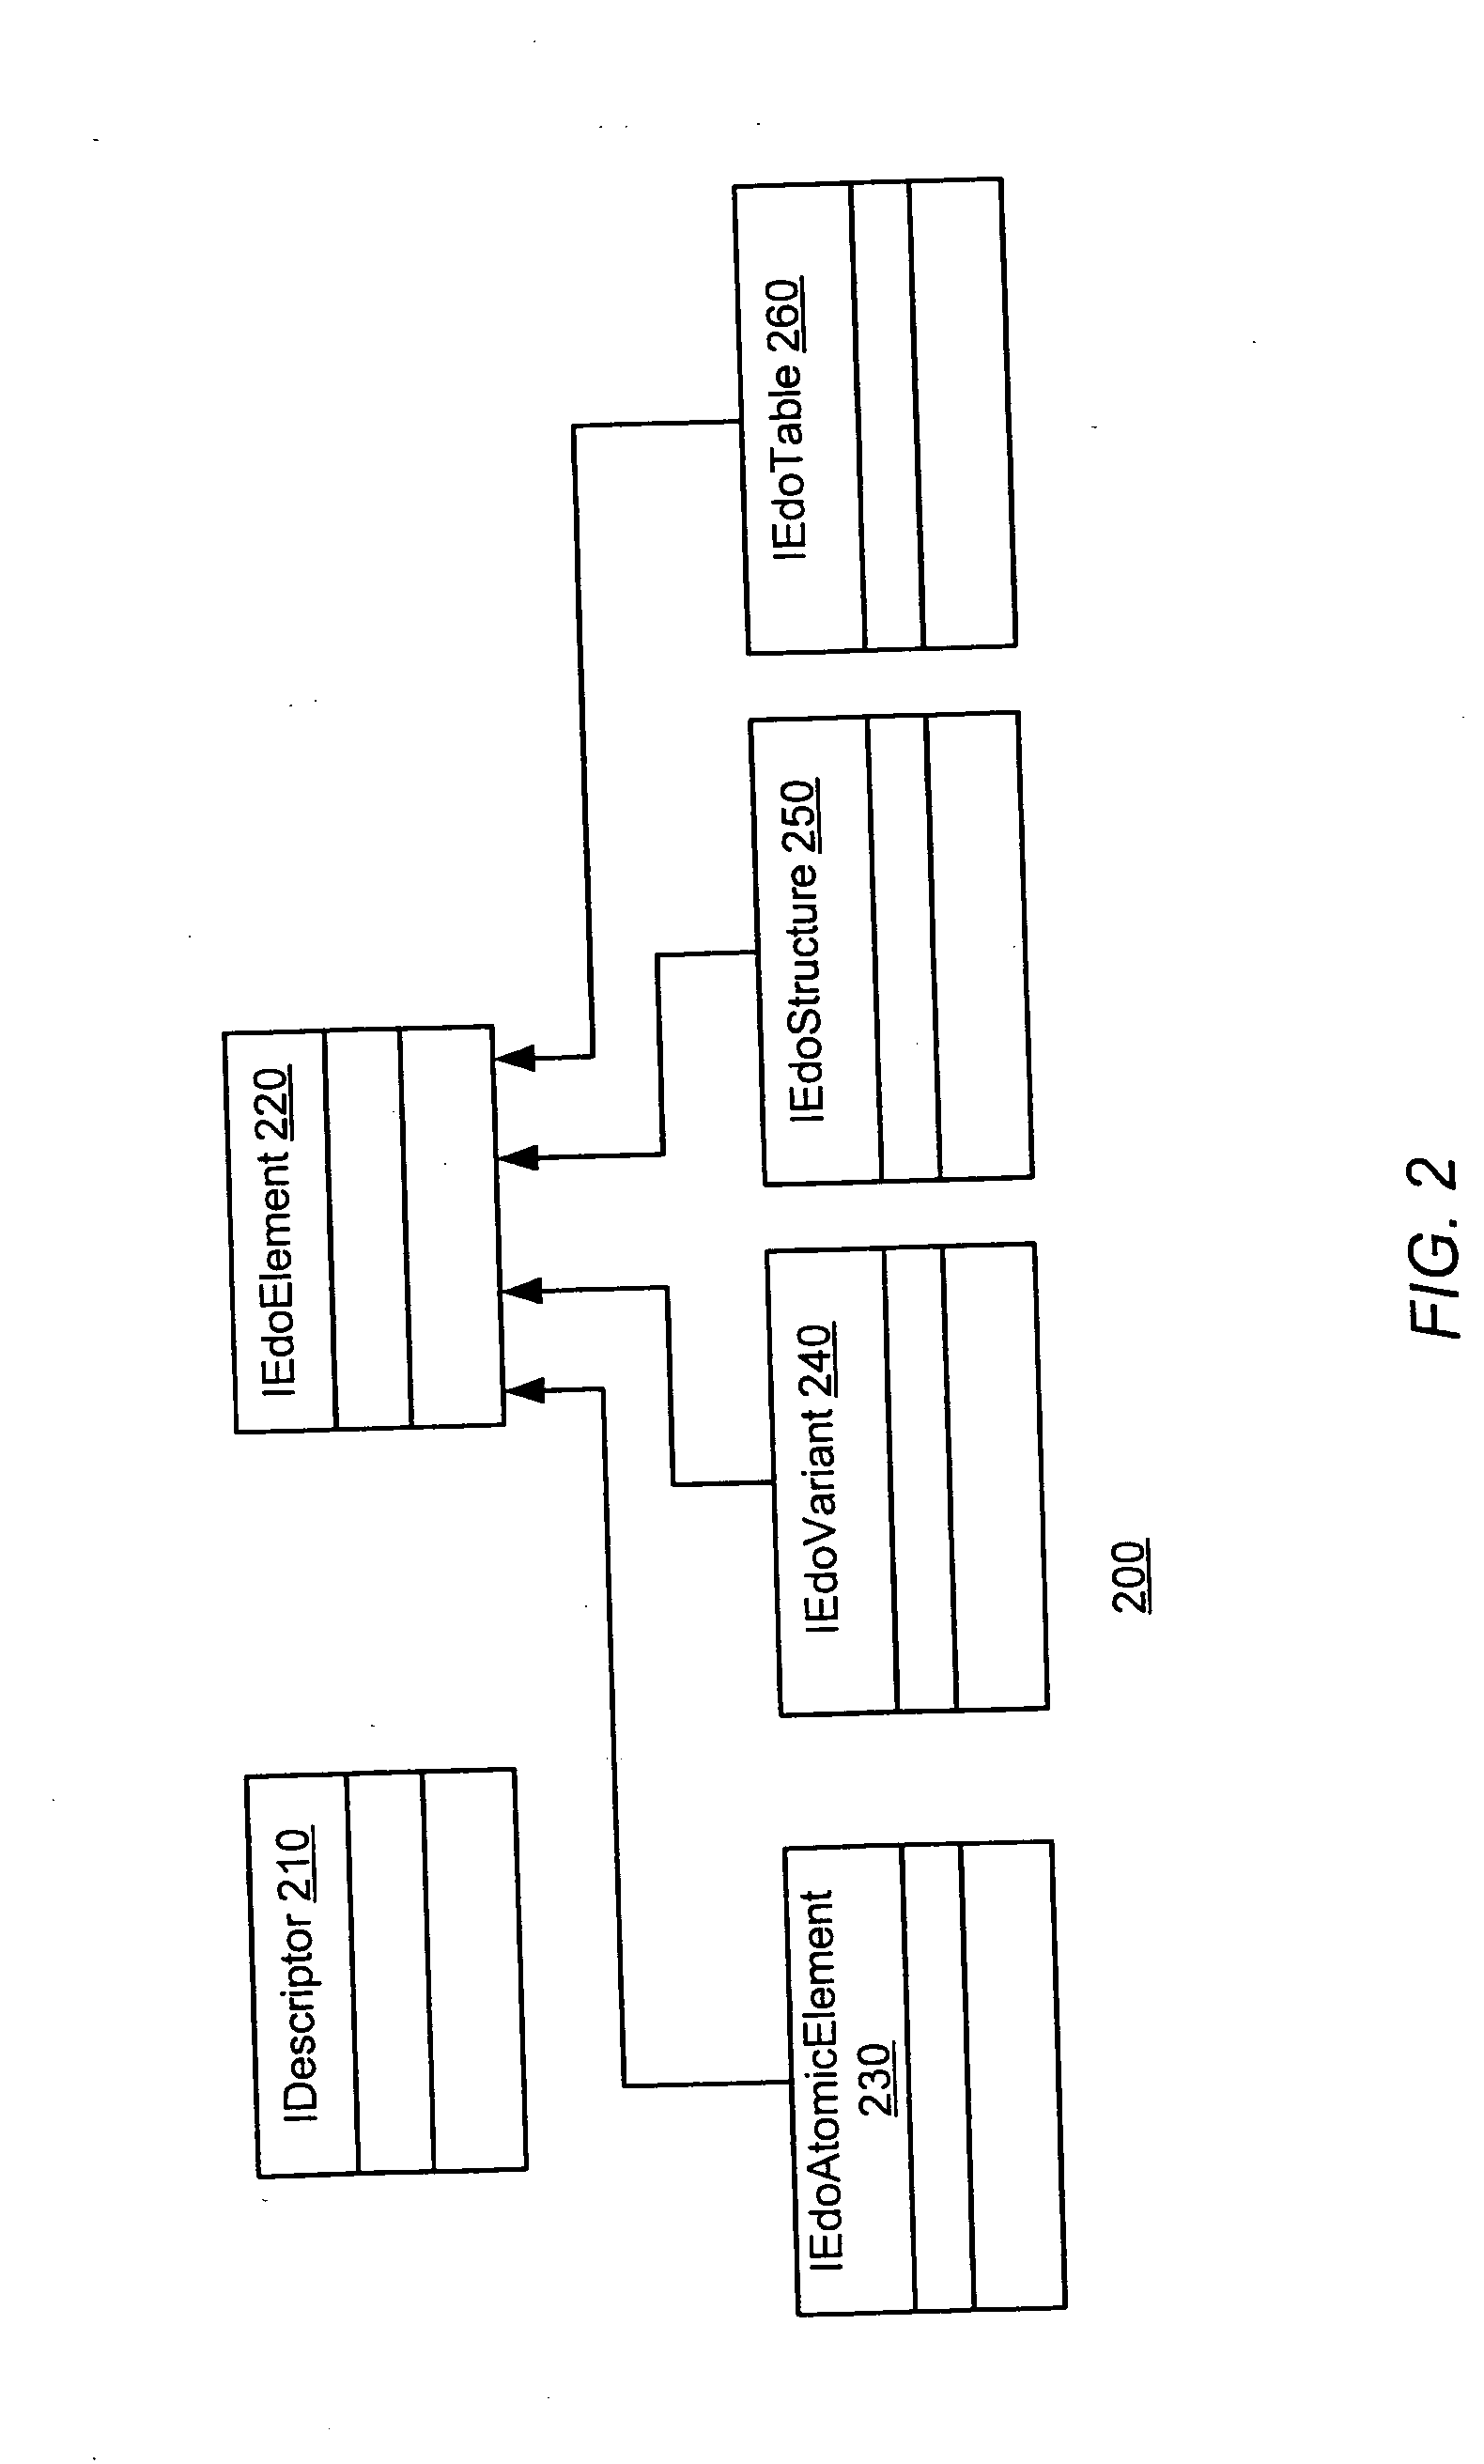 System and method for enterprise data objects